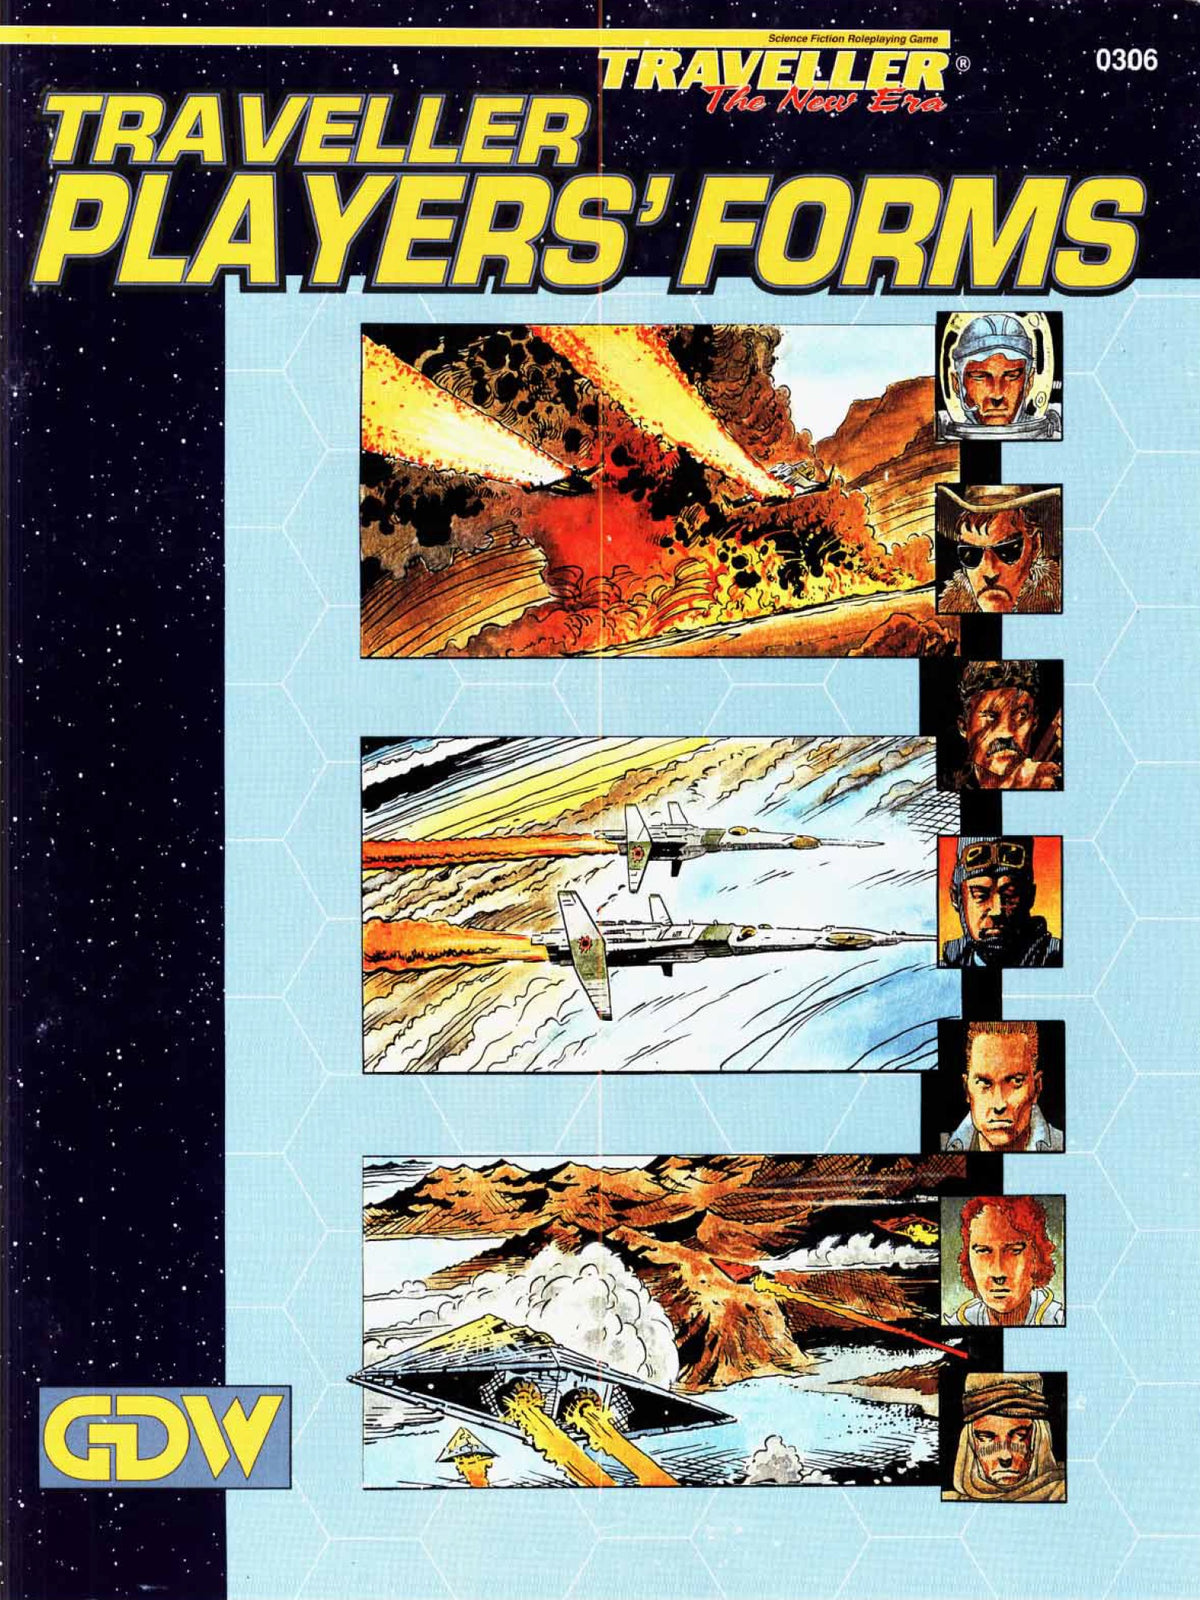 Traveller Players' Forms ebook